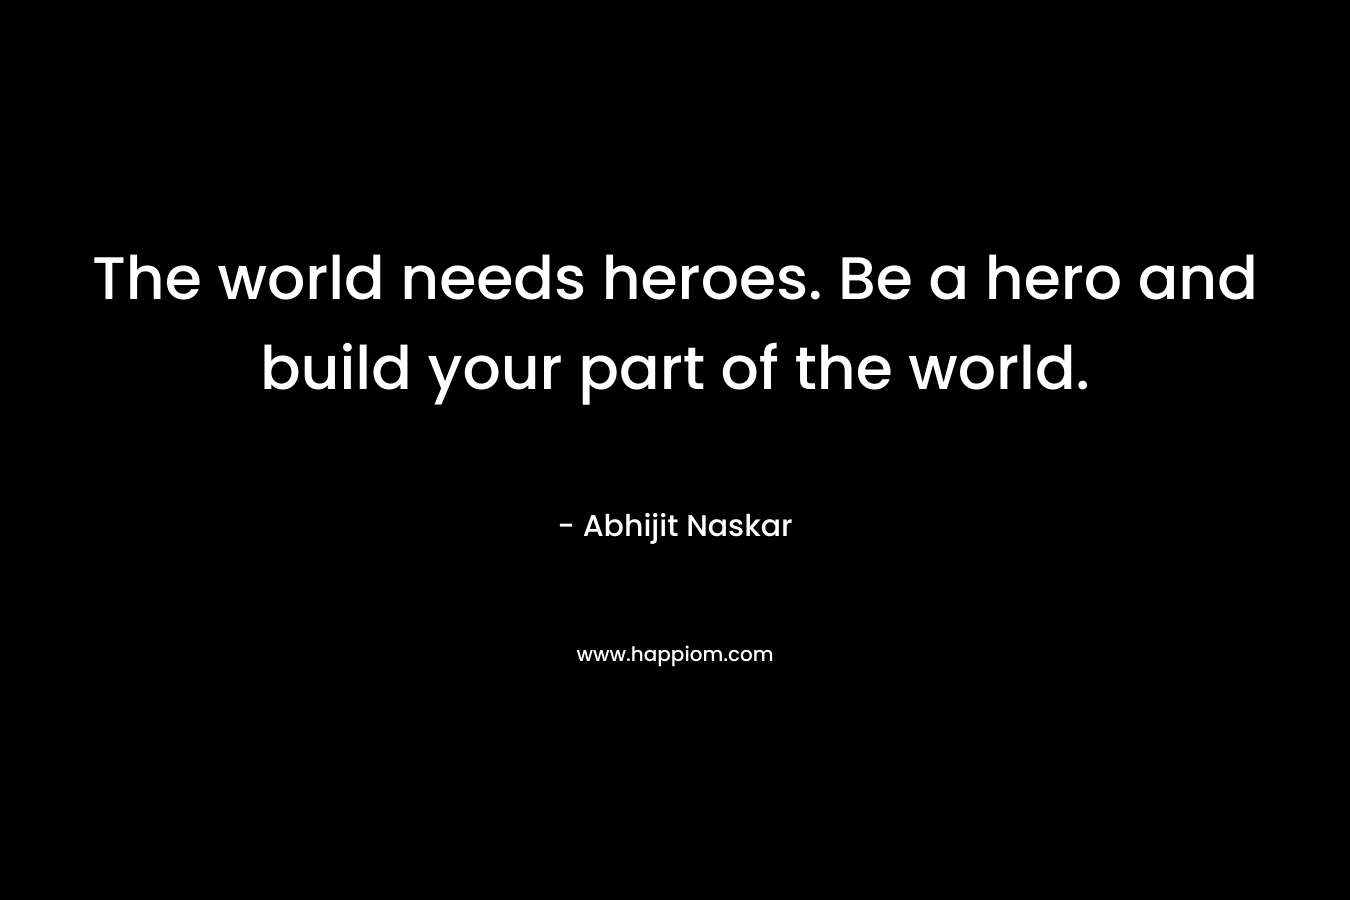 The world needs heroes. Be a hero and build your part of the world.